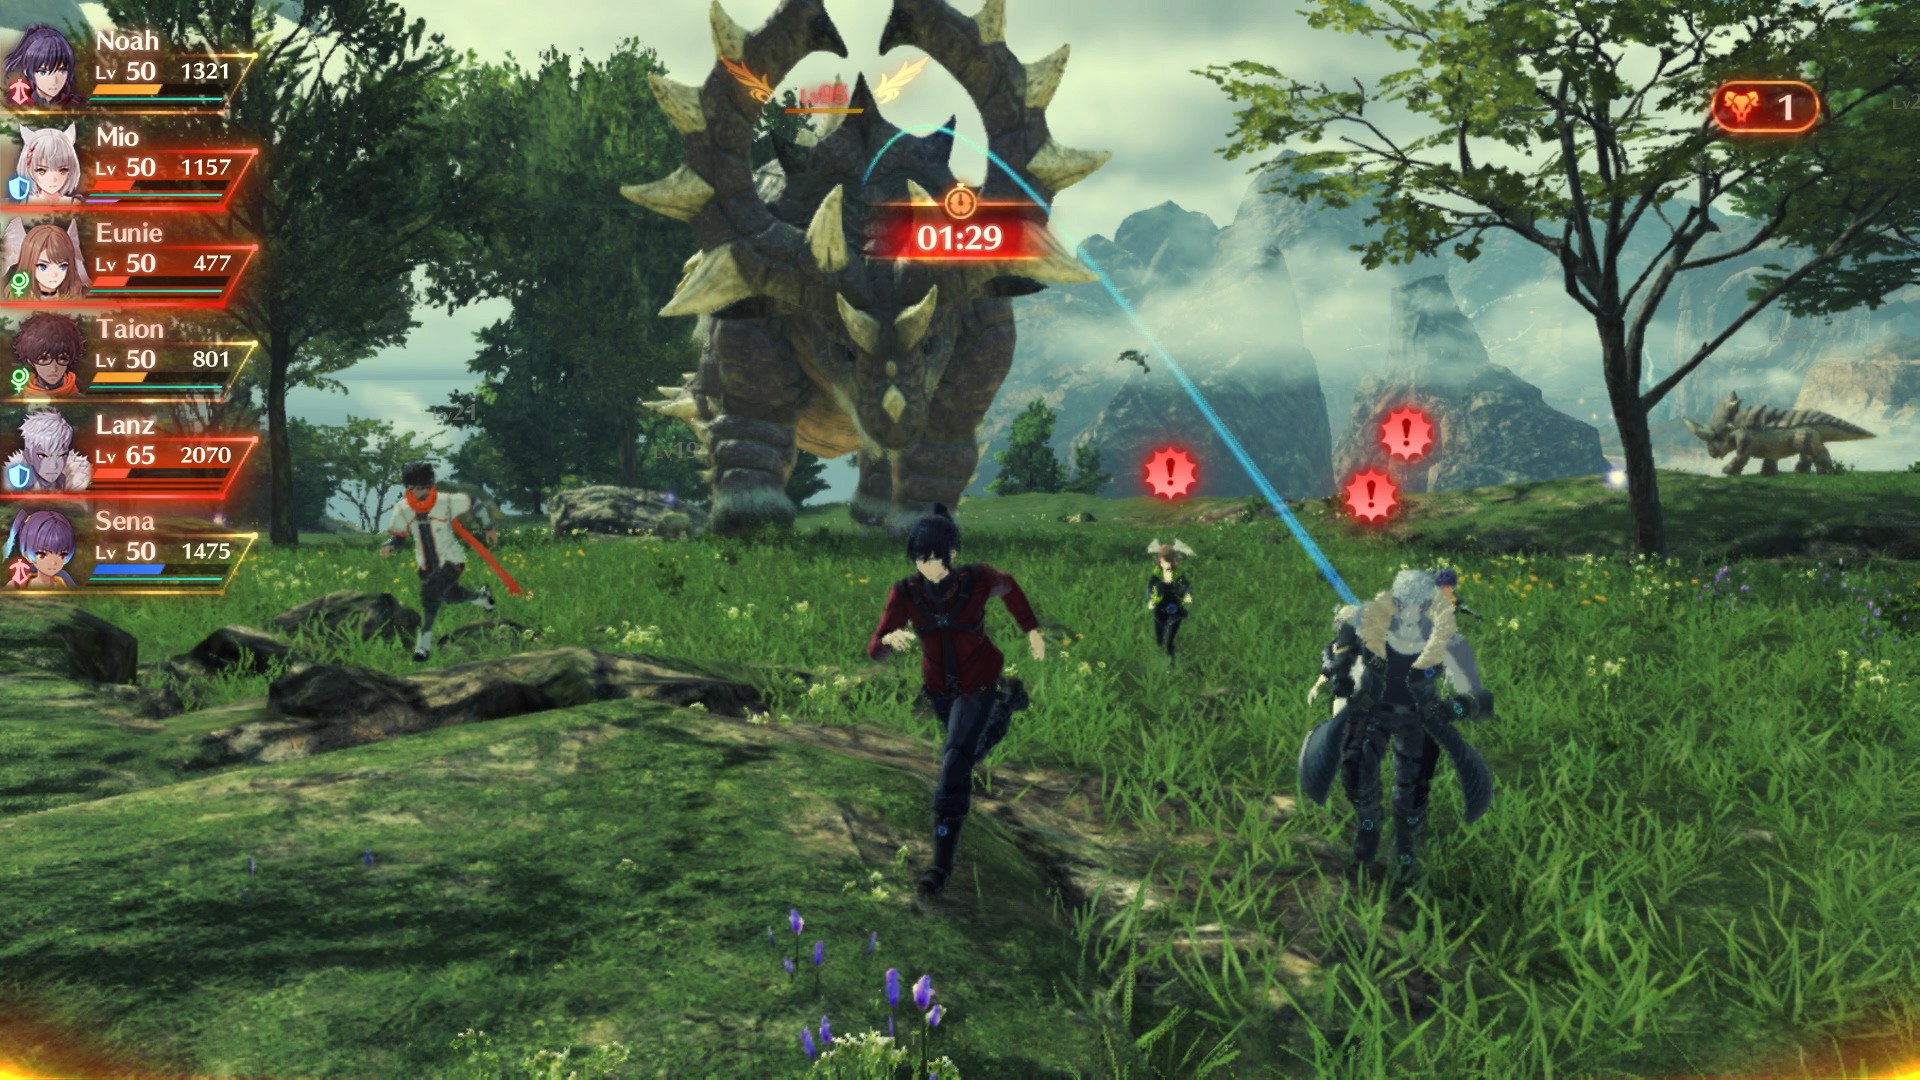 Xenoblade Chronicles 3 is complex, gargantuan, and brilliant, Hands-on  preview